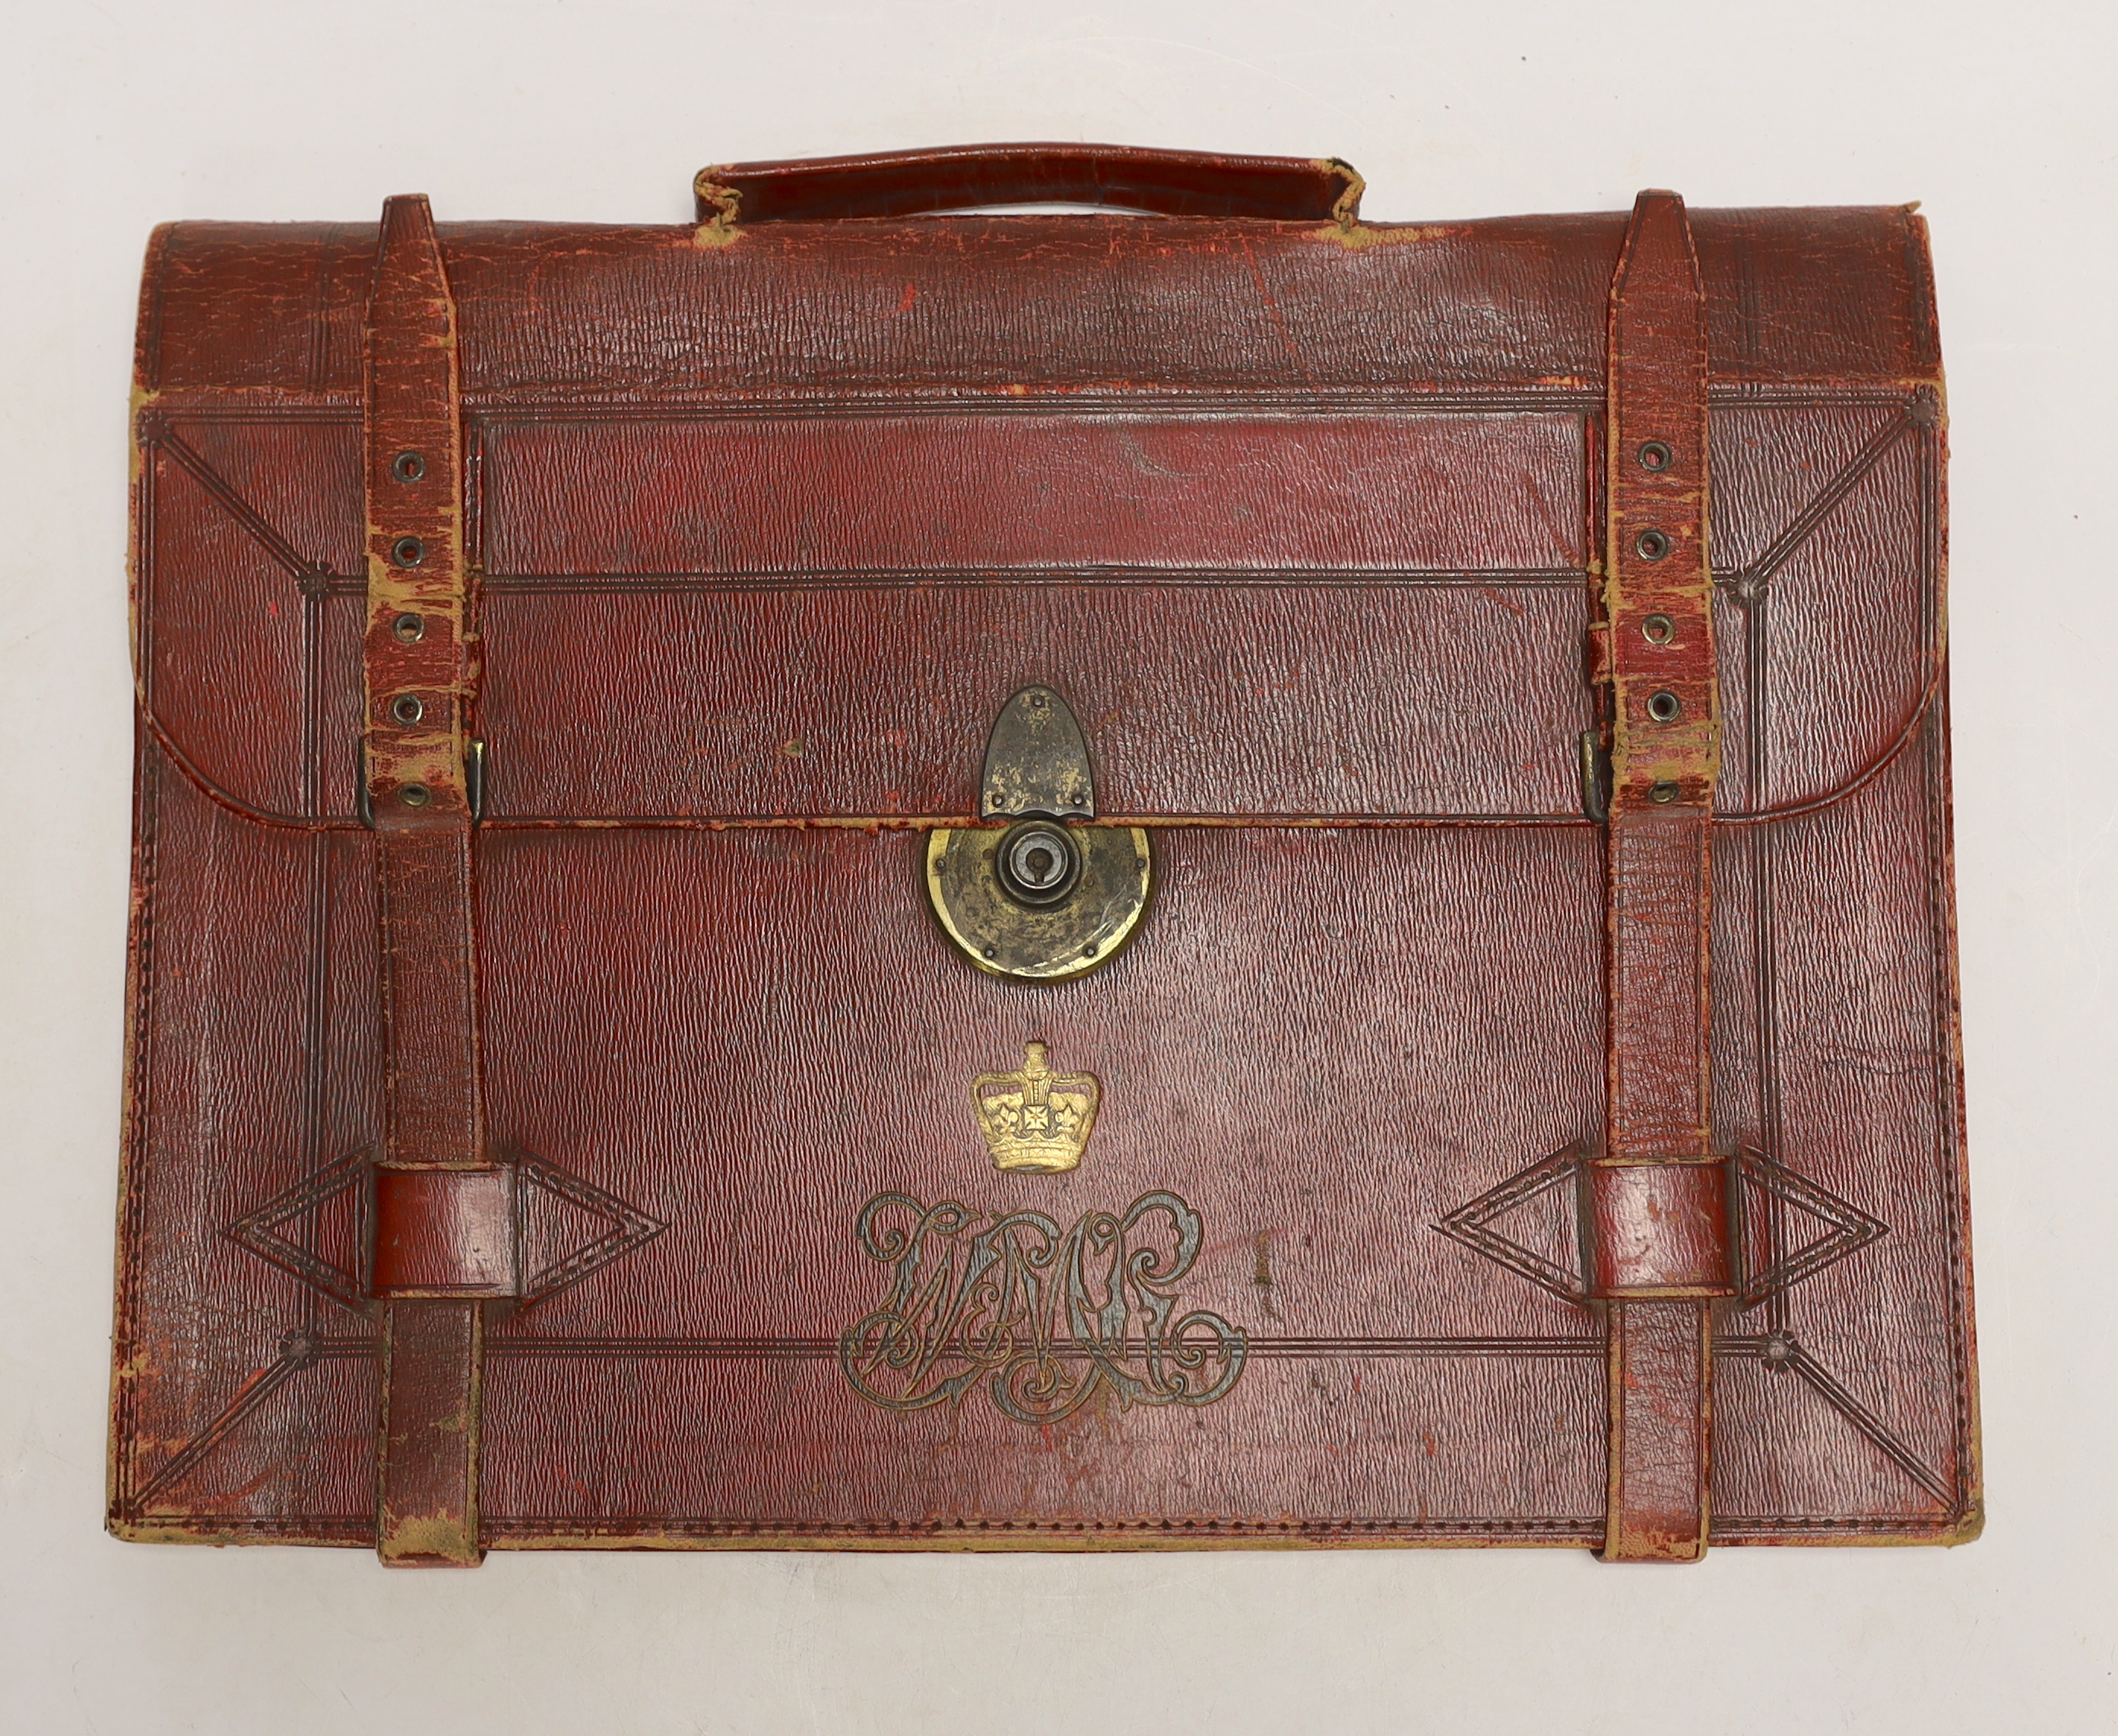 A vintage Moroccan red leather briefcase used by Willie Kendall in ‘Diplomacy’, Wickwar Manufacturer, Poland street, London, with handwritten letters                                                                       